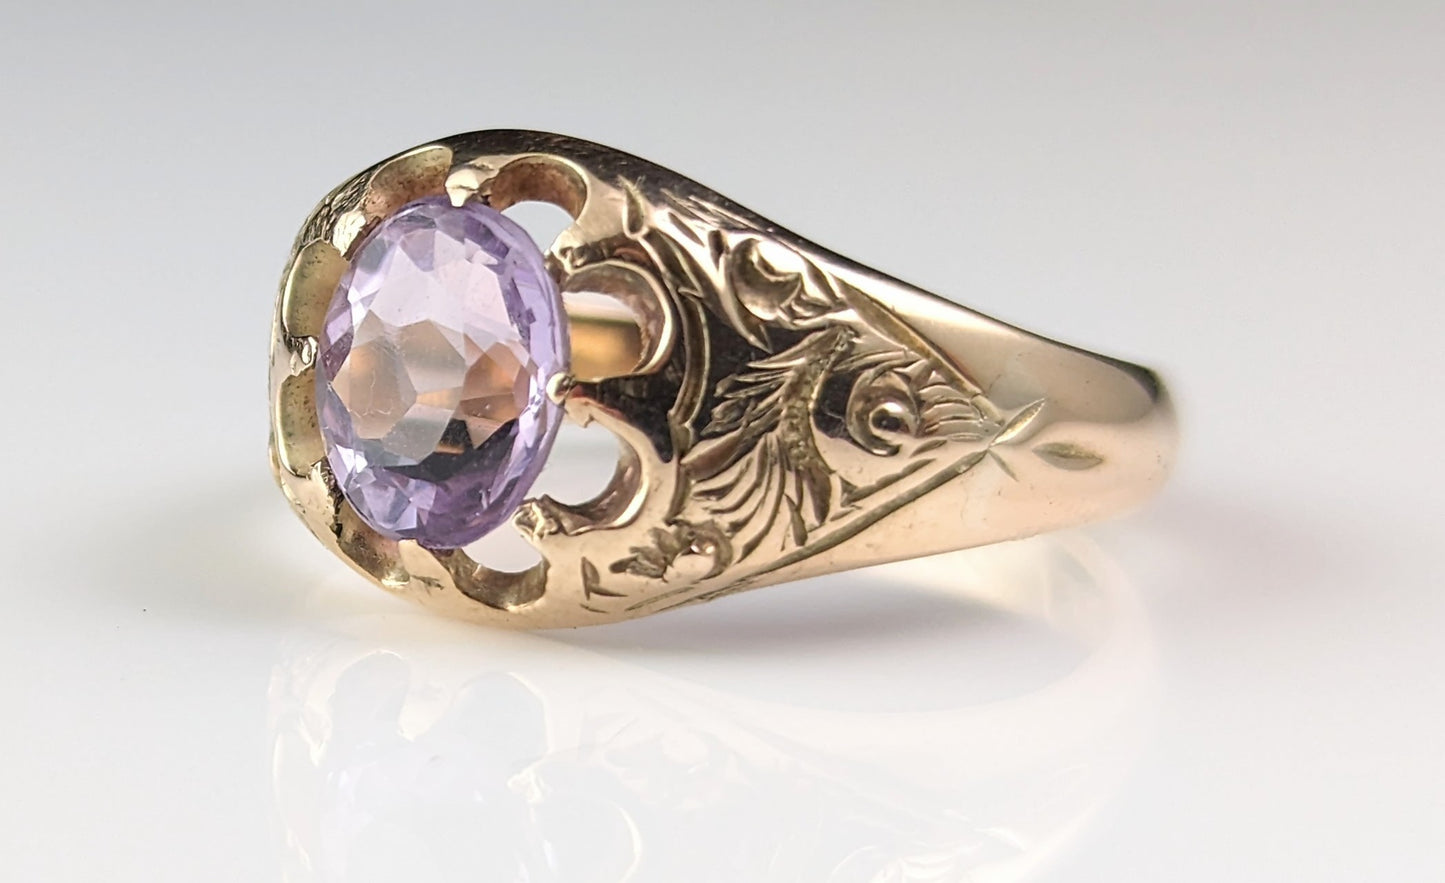 Vintage Art Deco Amethyst signet ring, 9ct gold, solitaire